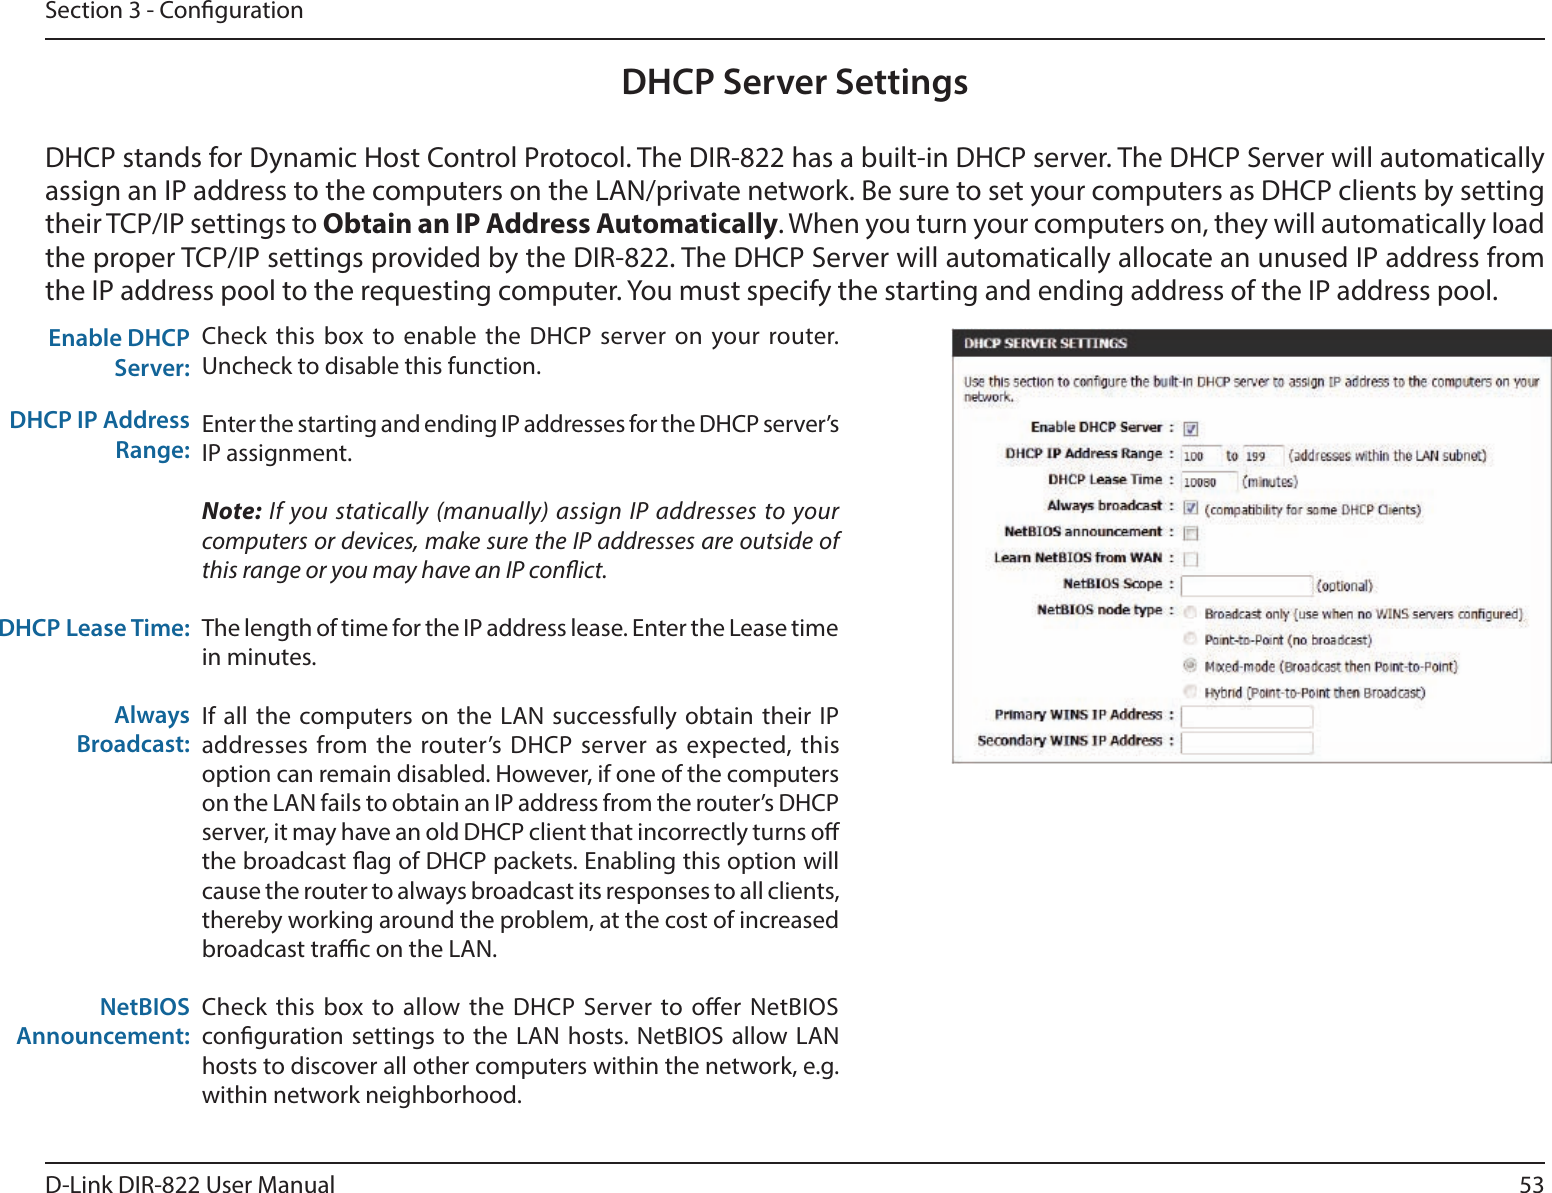 53D-Link DIR-822 User ManualSection 3 - CongurationDHCP Server SettingsDHCP stands for Dynamic Host Control Protocol. The DIR-822 has a built-in DHCP server. The DHCP Server will automatically assign an IP address to the computers on the LAN/private network. Be sure to set your computers as DHCP clients by setting their TCP/IP settings to ObtainanIPAddressAutomatically. When you turn your computers on, they will automatically load the proper TCP/IP settings provided by the DIR-822. The DHCP Server will automatically allocate an unused IP address from the IP address pool to the requesting computer. You must specify the starting and ending address of the IP address pool.Check this box to enable the DHCP server on your router. Uncheck to disable this function.Enter the starting and ending IP addresses for the DHCP server’s IP assignment.Note: If you statically (manually) assign IP addresses to your computers or devices, make sure the IP addresses are outside of this range or you may have an IP conict. The length of time for the IP address lease. Enter the Lease time in minutes.If all the computers on the LAN successfully obtain their IP addresses from the router’s DHCP server as expected, this option can remain disabled. However, if one of the computers on the LAN fails to obtain an IP address from the router’s DHCP server, it may have an old DHCP client that incorrectly turns o the broadcast ag of DHCP packets. Enabling this option will cause the router to always broadcast its responses to all clients, thereby working around the problem, at the cost of increased broadcast trac on the LAN.Check this box to allow the DHCP Server to oer NetBIOS conguration settings to the LAN hosts. NetBIOS allow LAN hosts to discover all other computers within the network, e.g. within network neighborhood.Enable DHCP Server:DHCP IP Address Range:DHCP Lease Time:Always Broadcast:NetBIOS Announcement: